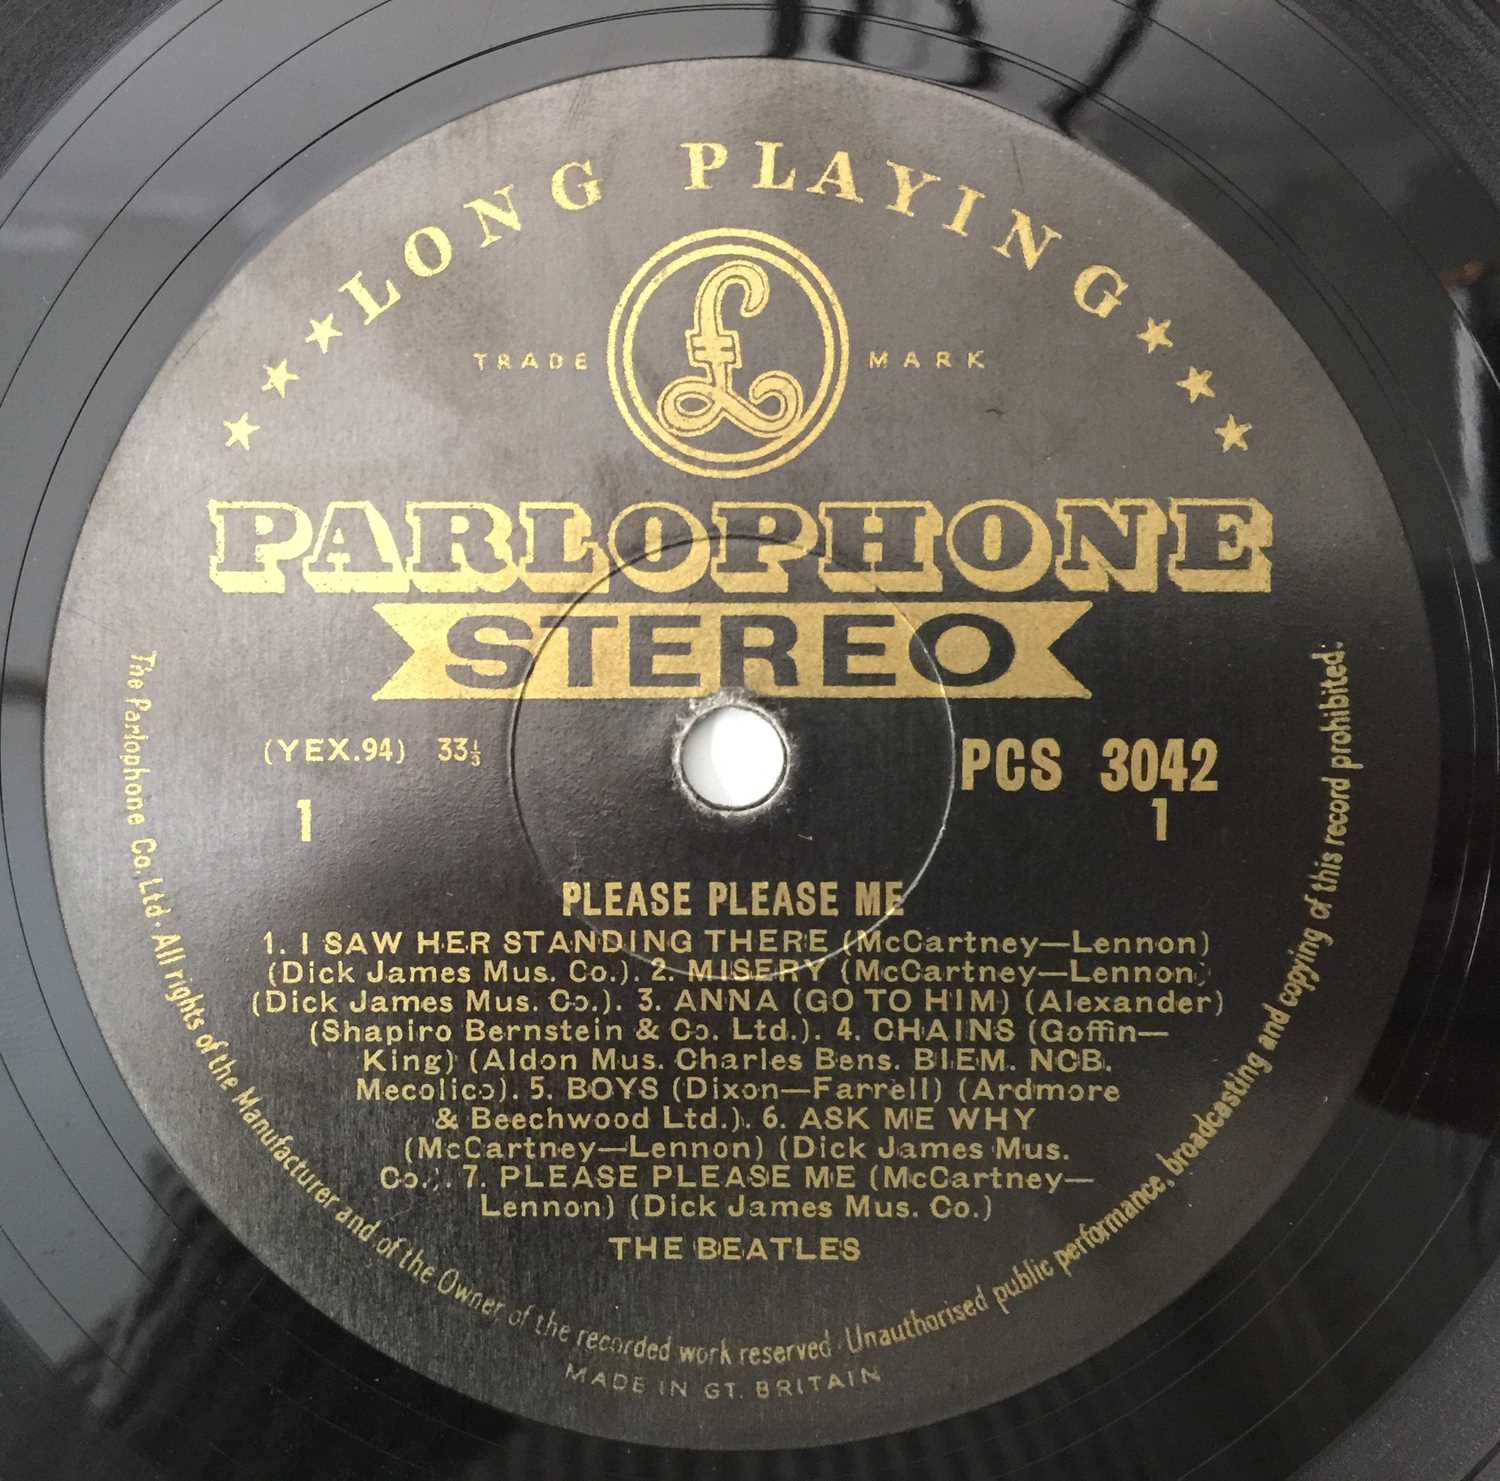 THE BEATLES - PLEASE PLEASE ME LP (ORIGINAL UK STEREO 'BLACK AND GOLD' PCS 3042) - Image 4 of 5